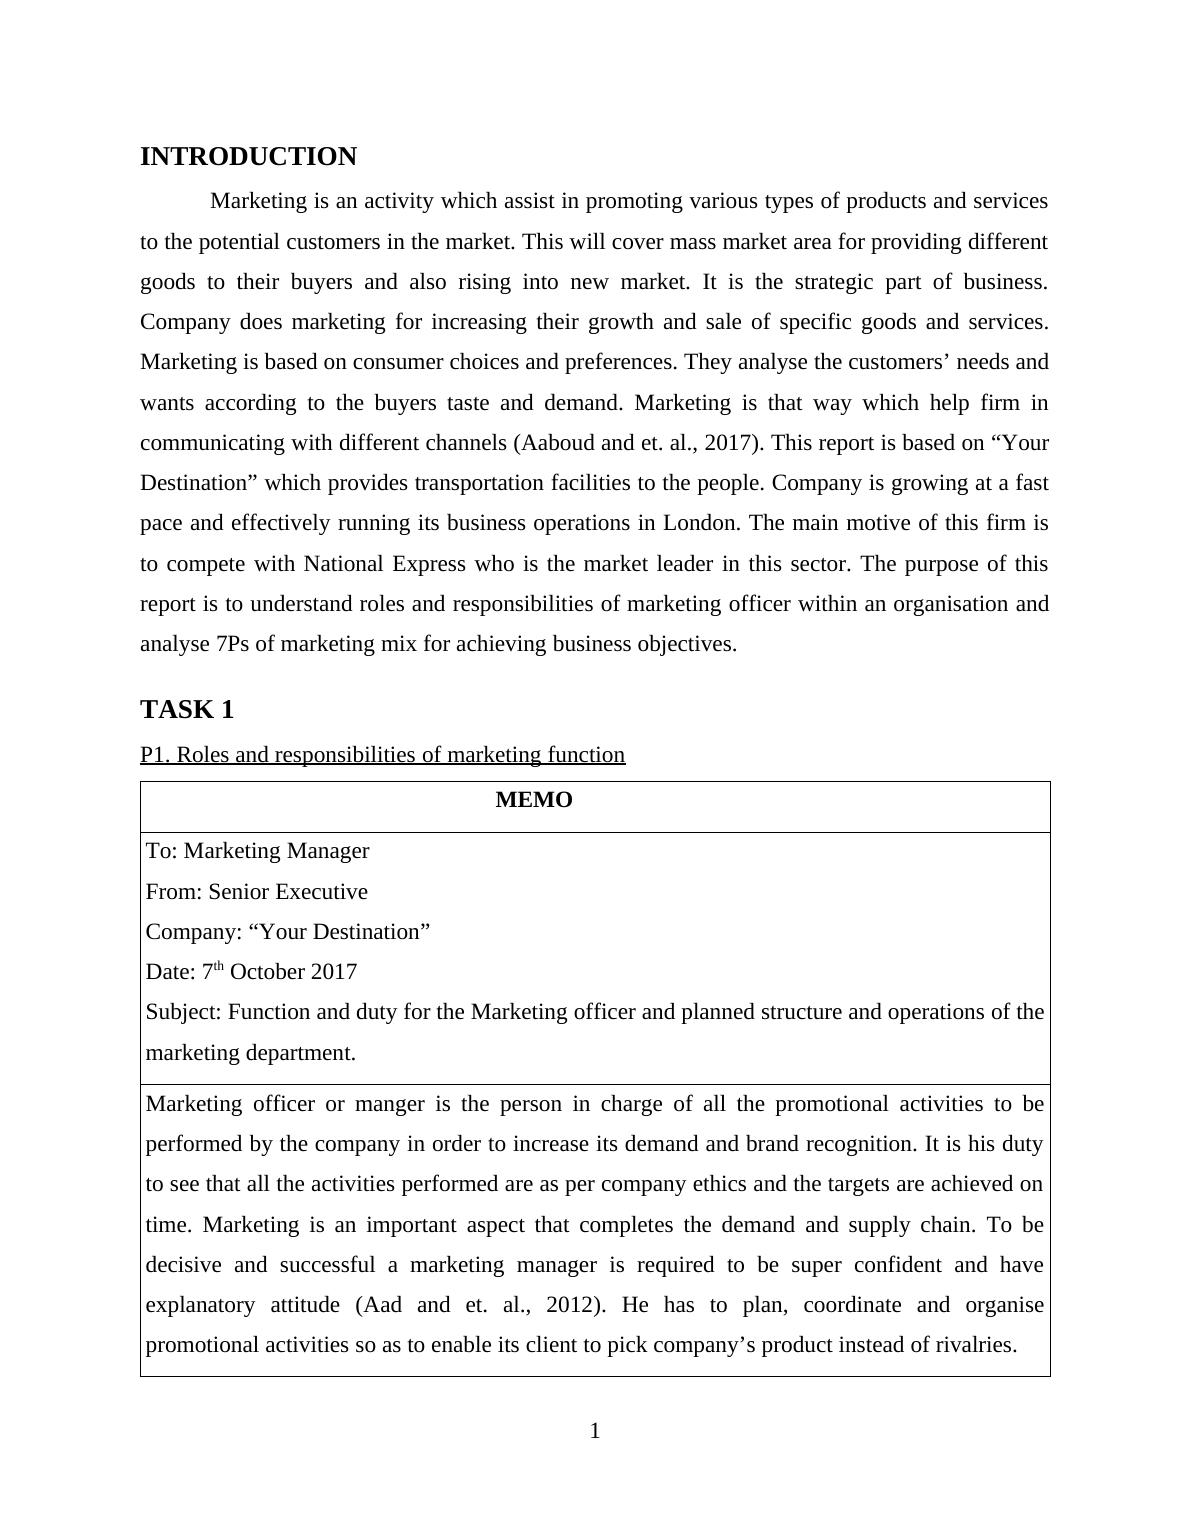 Roles nad Responsibilities of Marketing Officer - Report_3